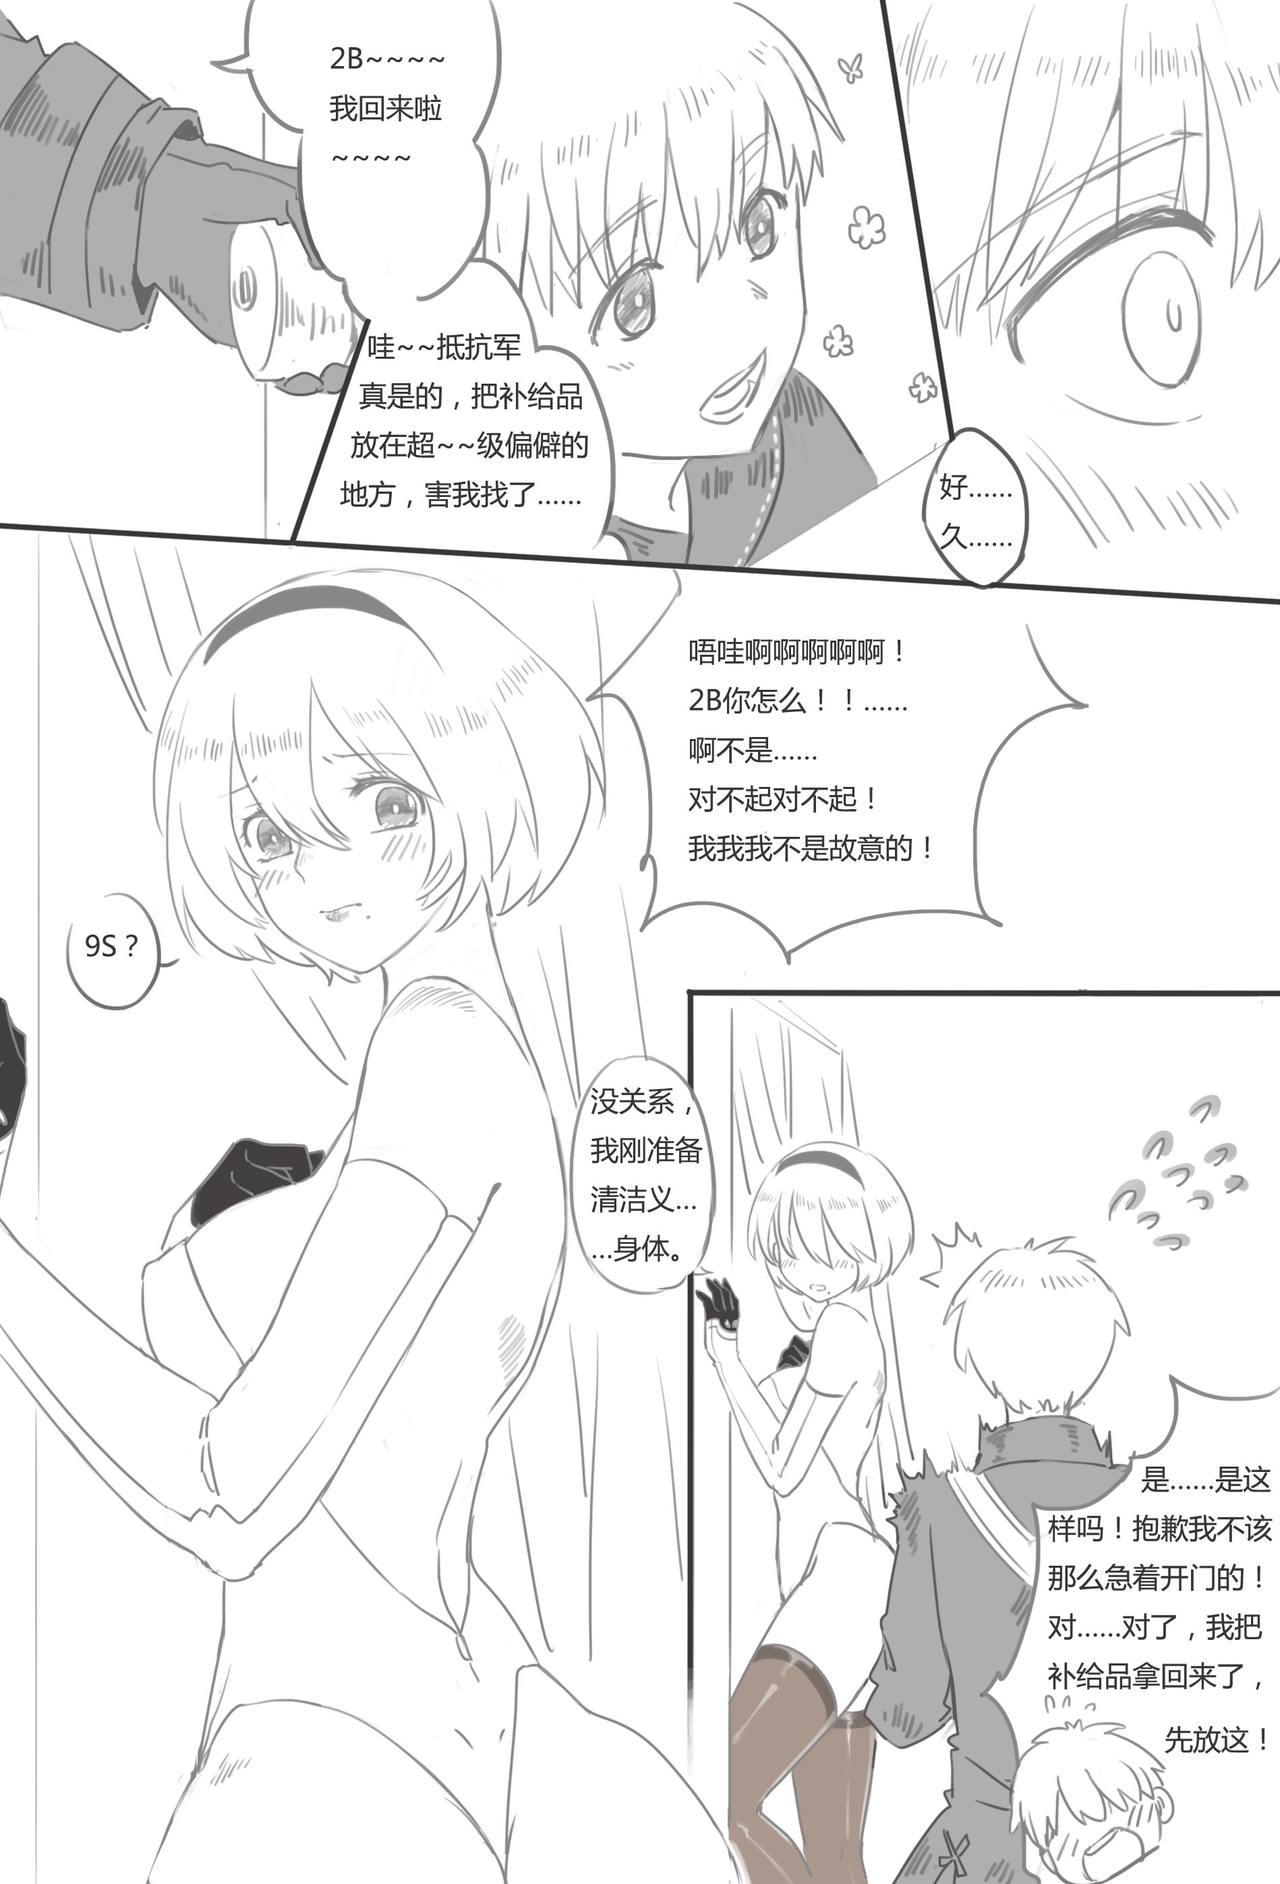 Funny [WS] 9Sx2B - Life after the [E] end. (NieR:Automata) [Chinese] - Nier automata Banho - Page 3